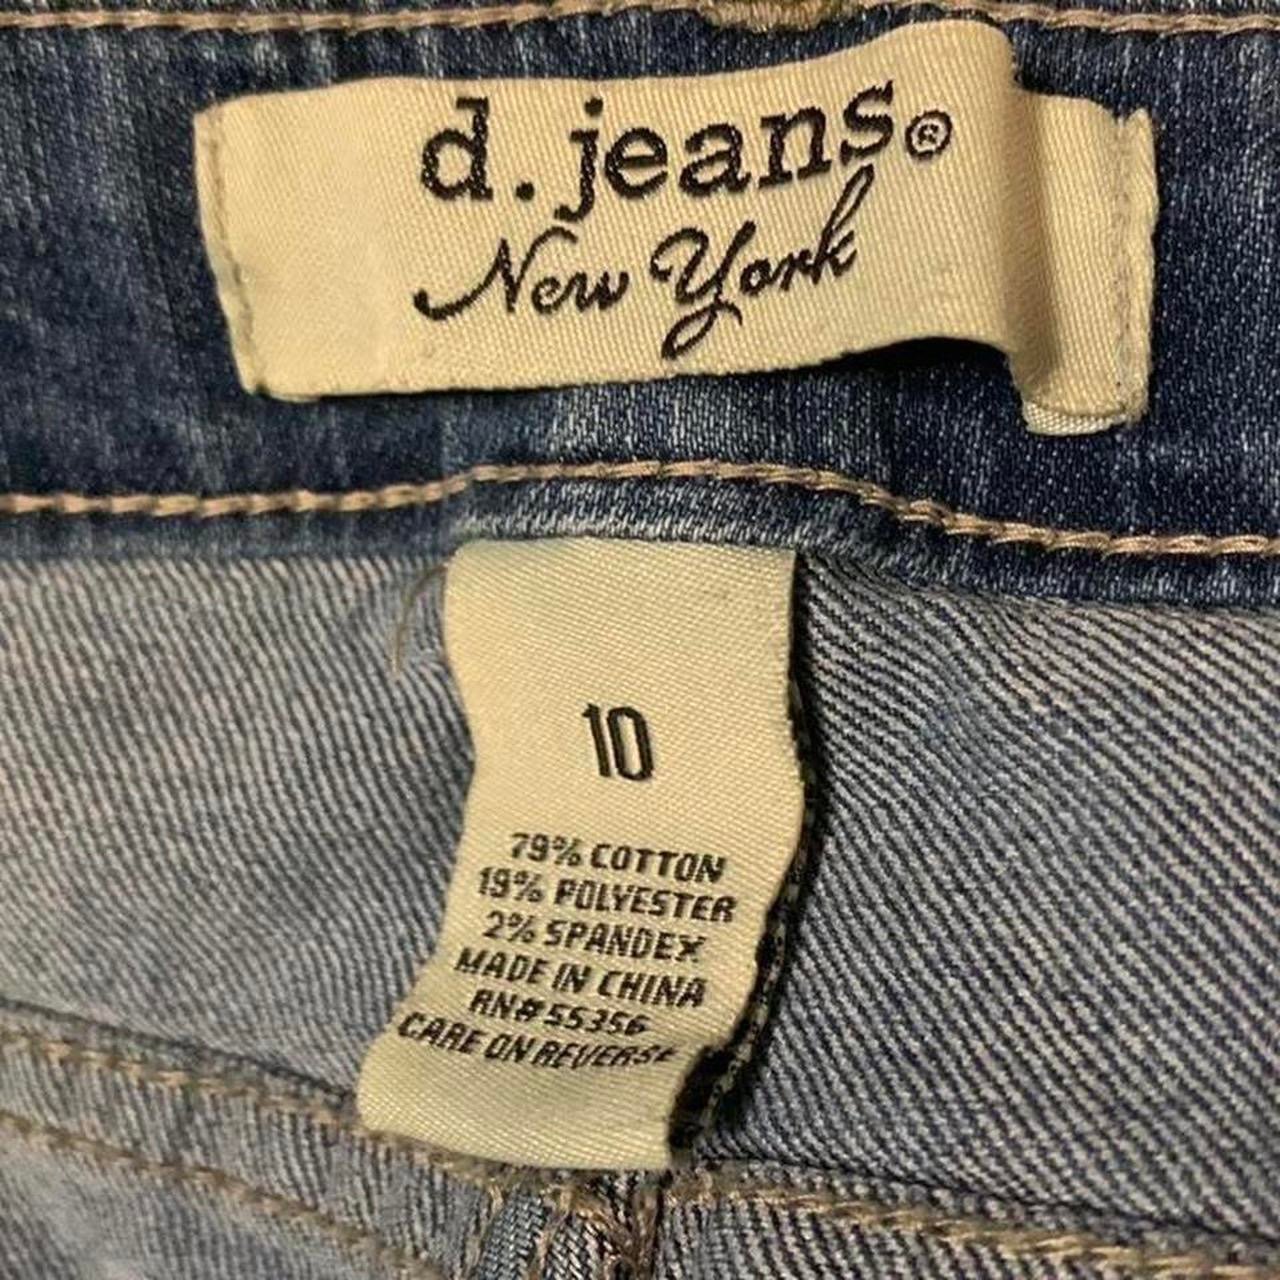 High quality D. jeans above the knee denim shorts HlMxNR3NI Outlet Store